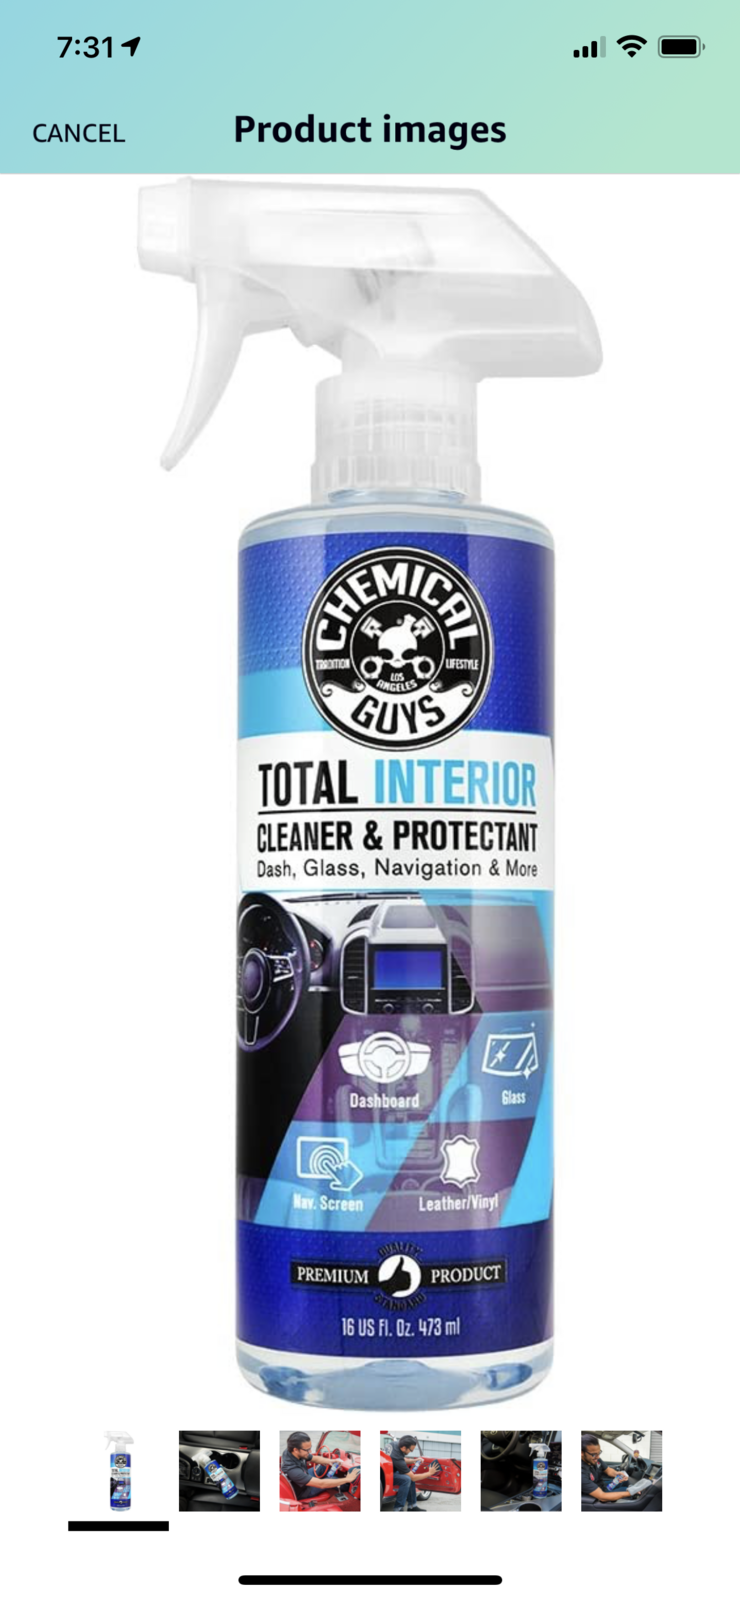 Ford Mustang Mach-E DIY car wash and ceramic coating recommendations EB748485-826B-4012-AC6F-AB06F4032D28